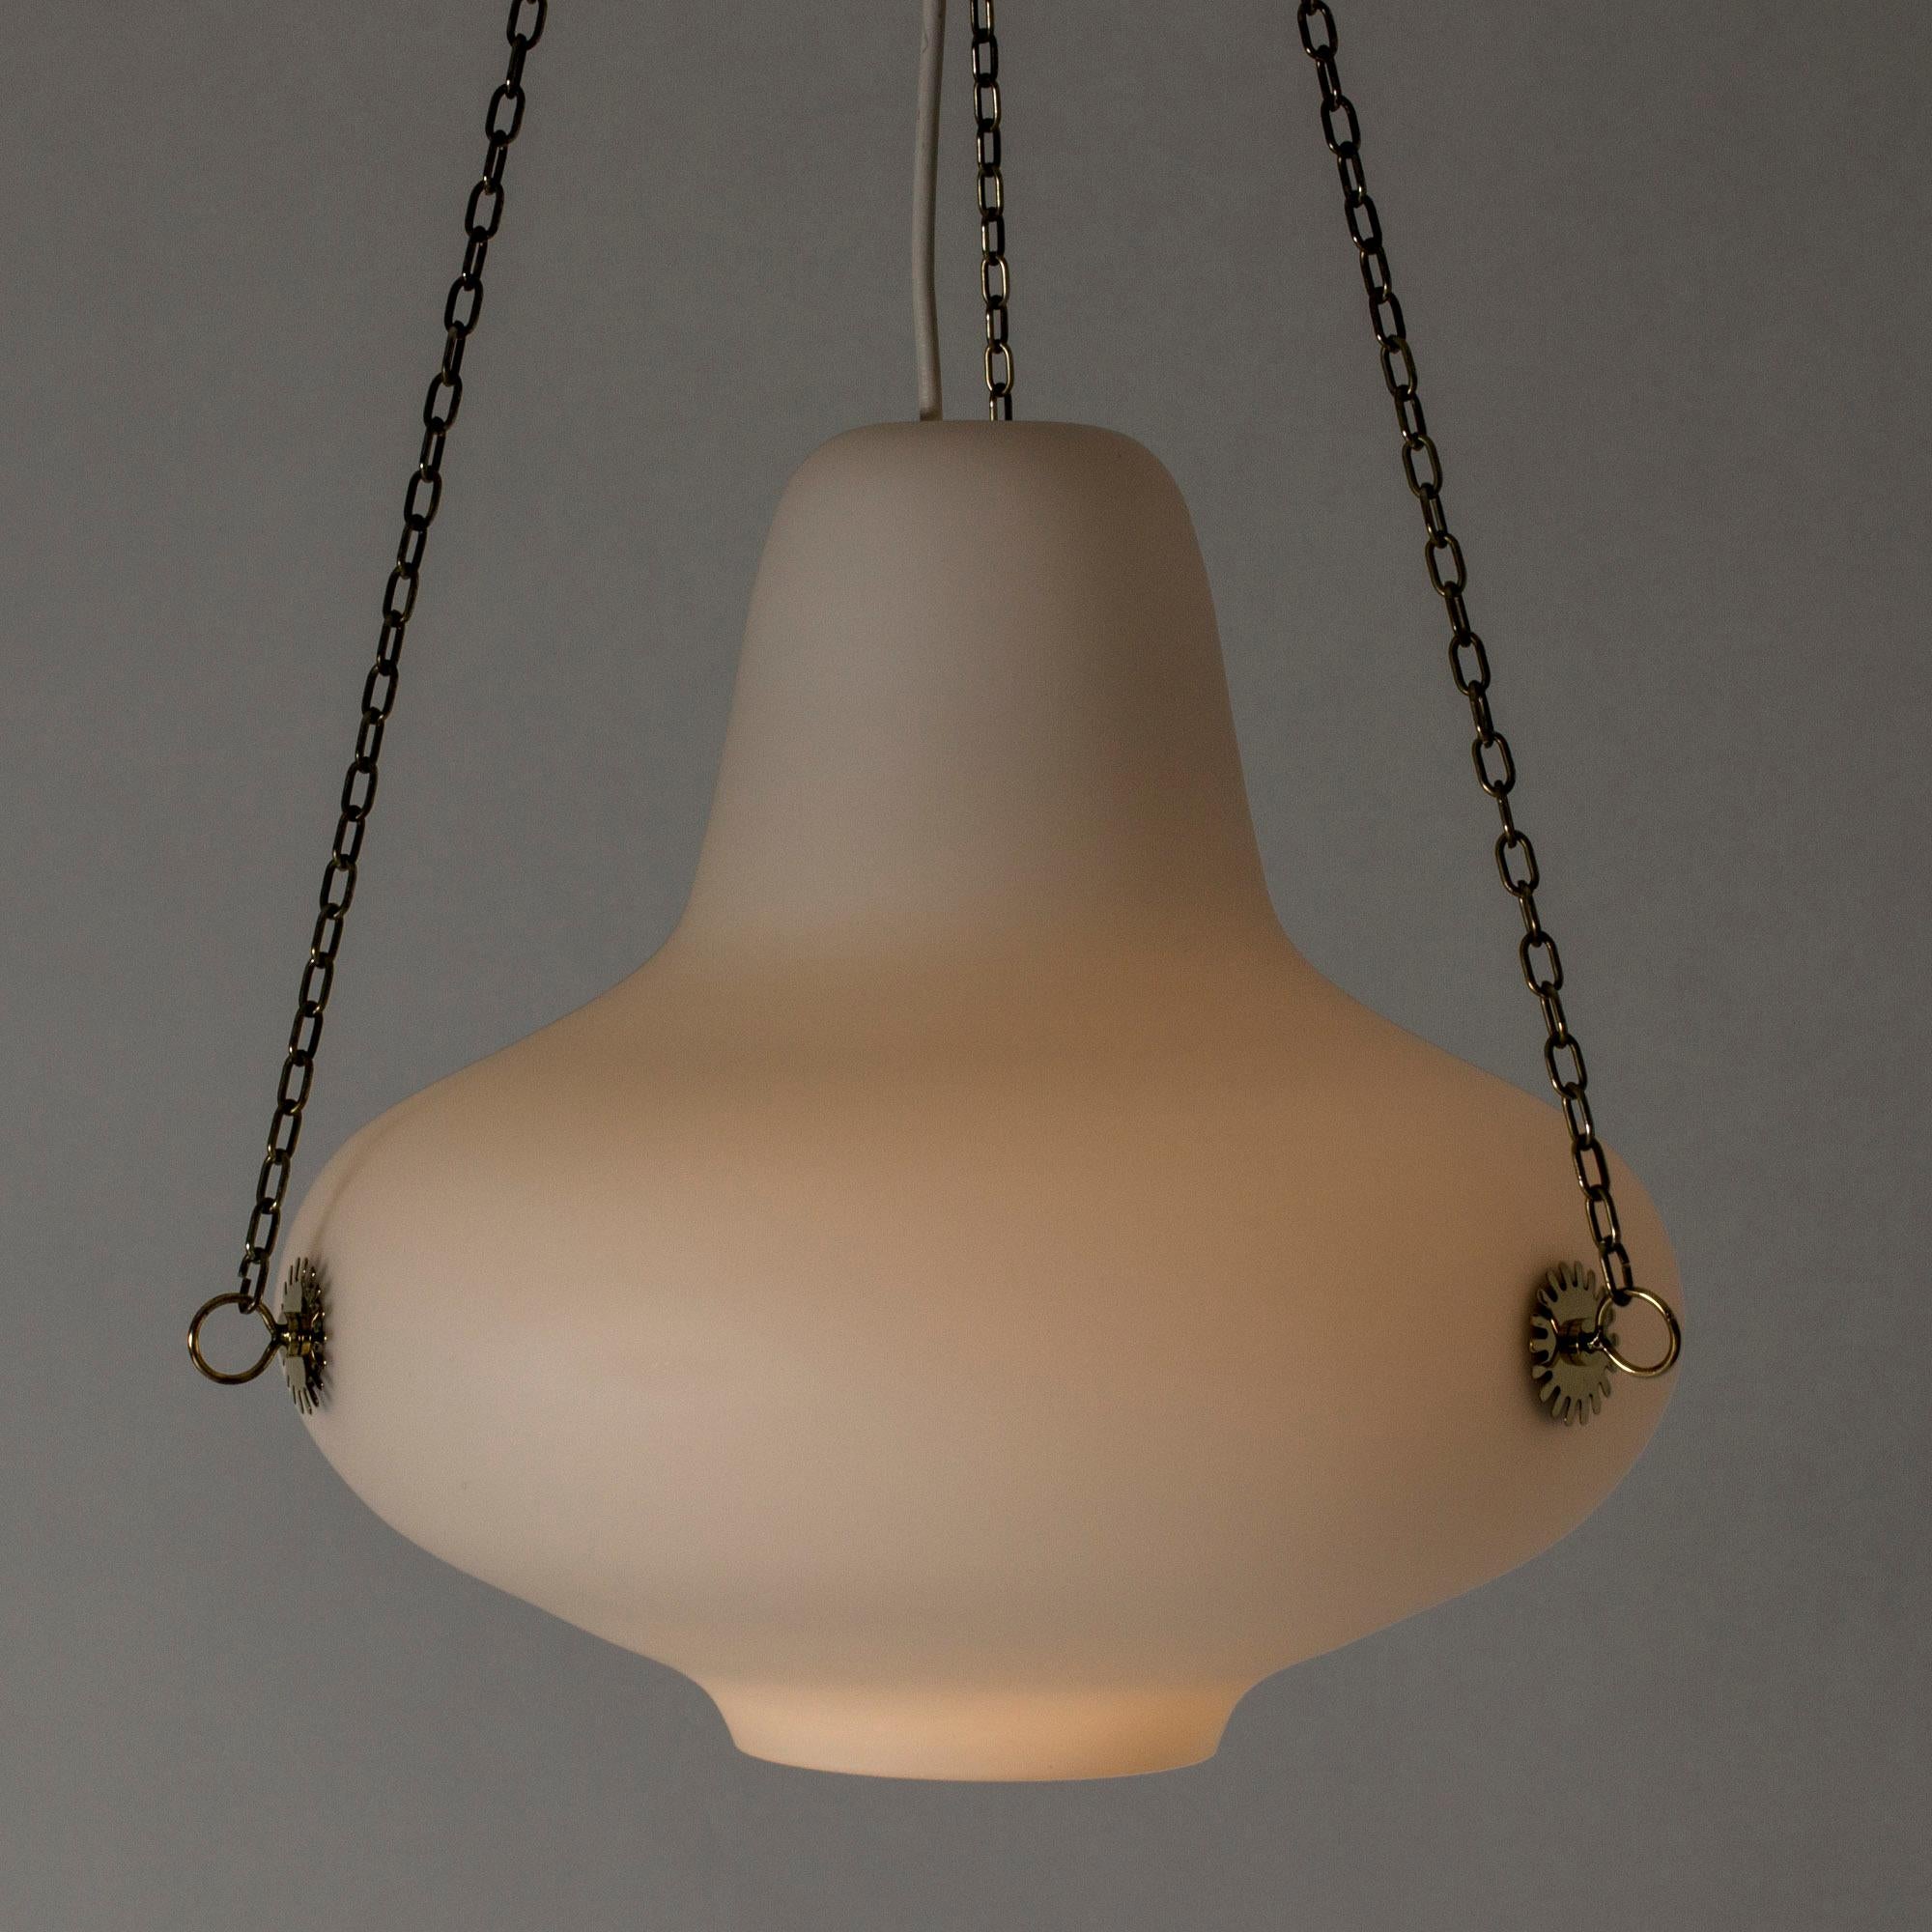 Beautiful ceiling lamp by Carl-Axel Acking, in a bulbous shape, made from opaline glass. Suspended with three brass chains attached to decorative hoops. Simplicity and elegance.